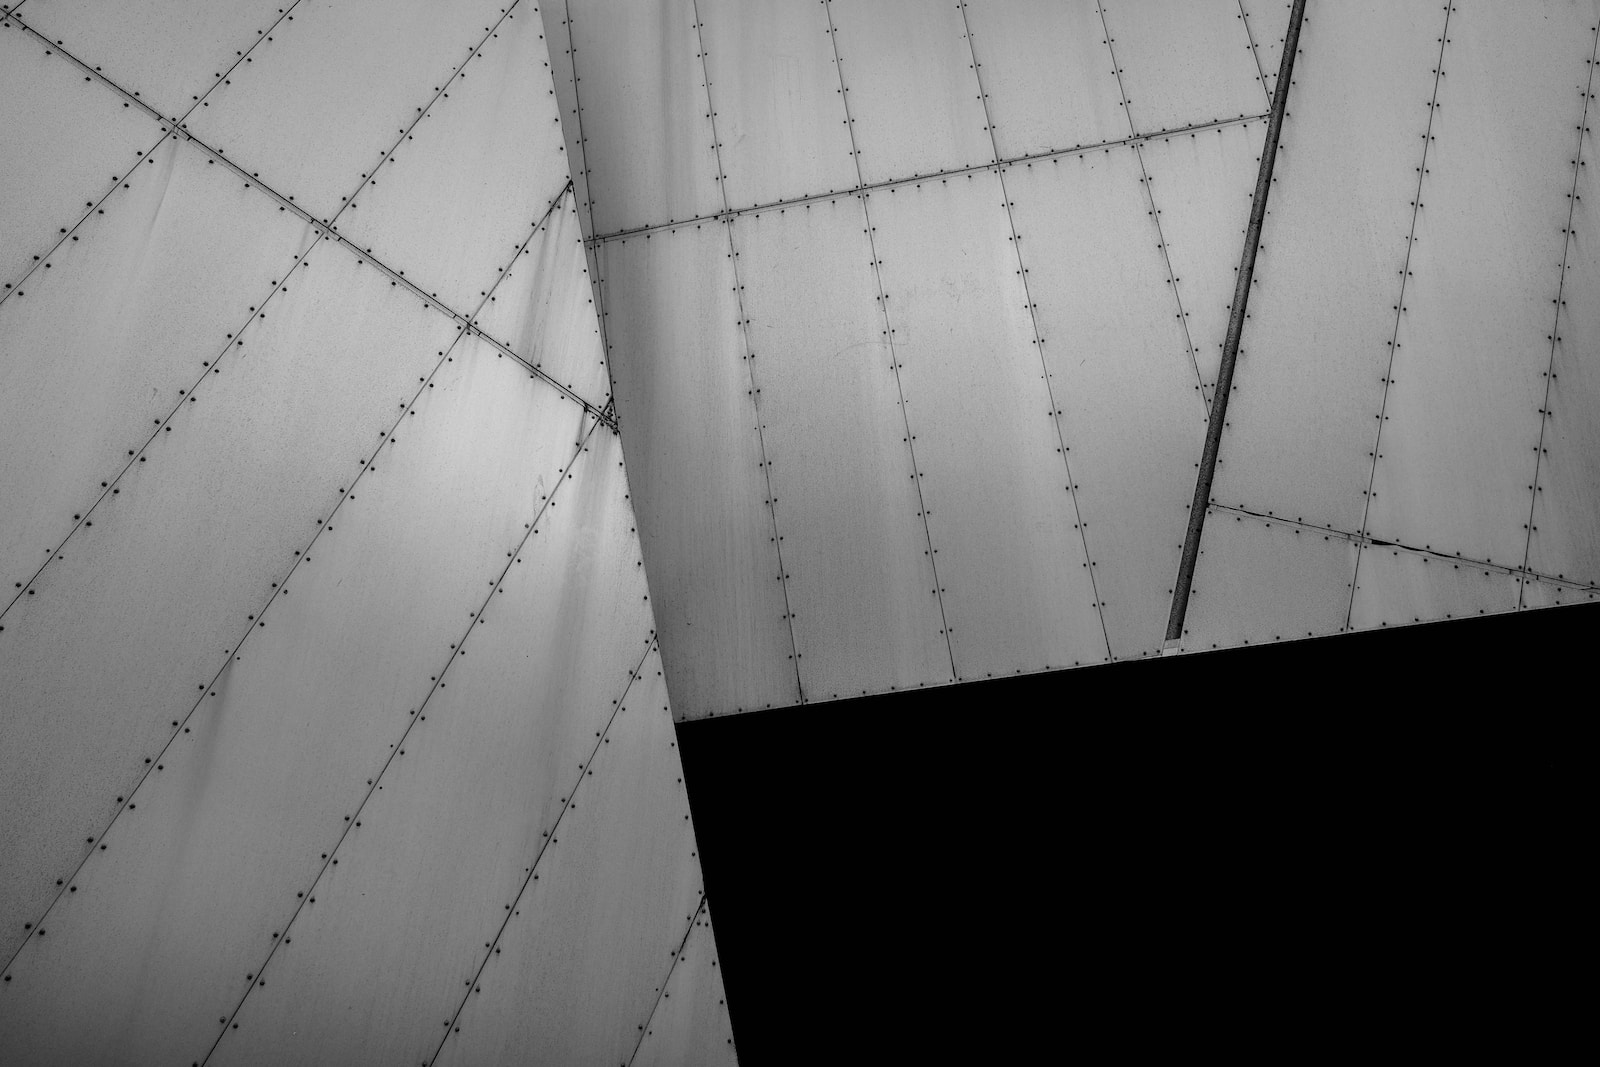 Sheet metal Black and white shot of bolted metal architecture lying at angles